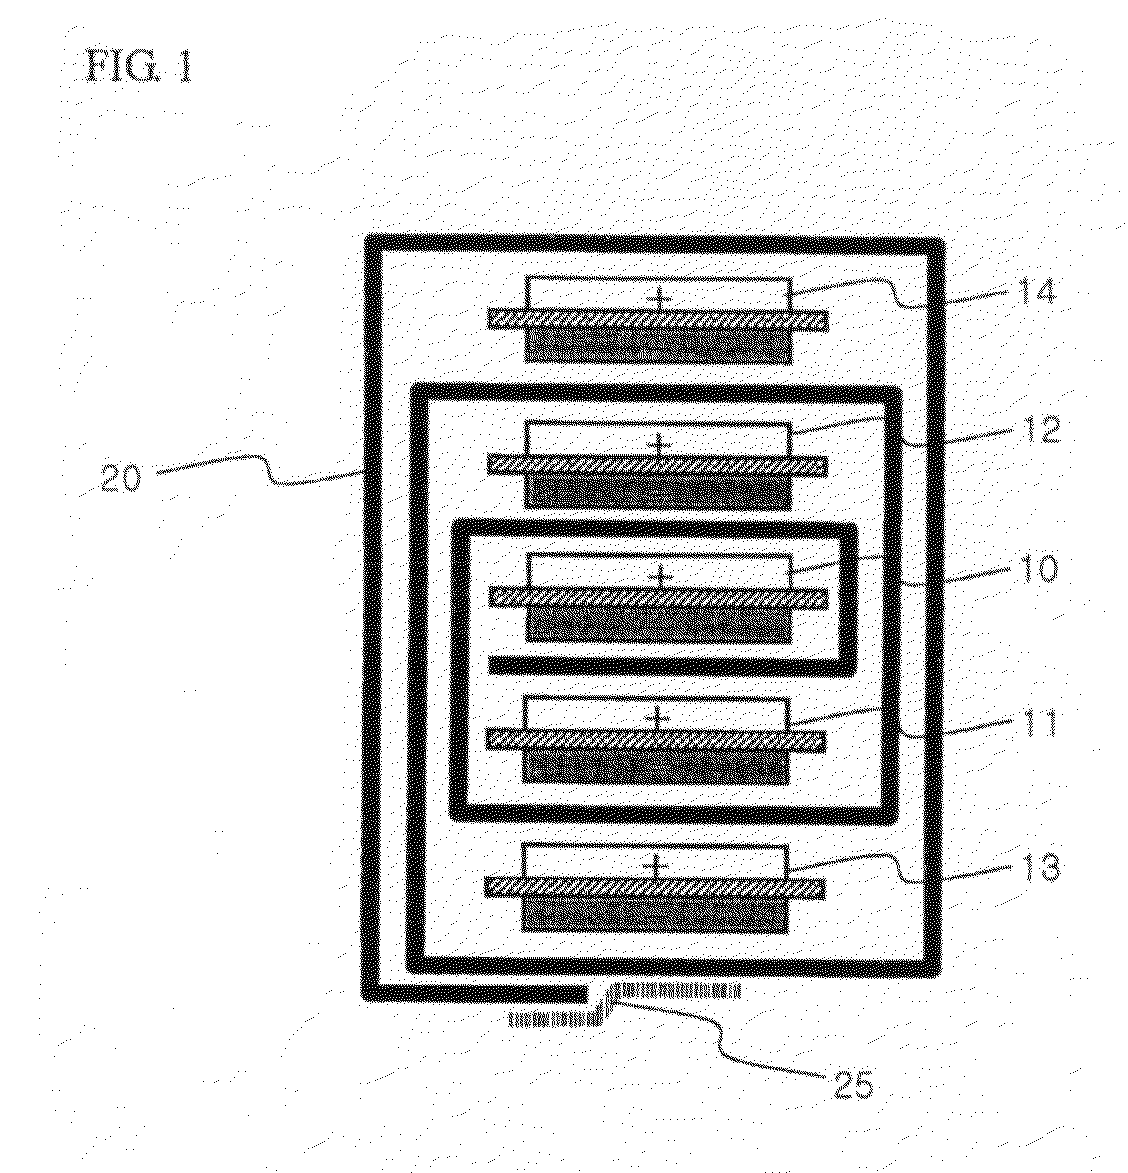 Stack and folding-typed electrode assembly and method for preparation of the same